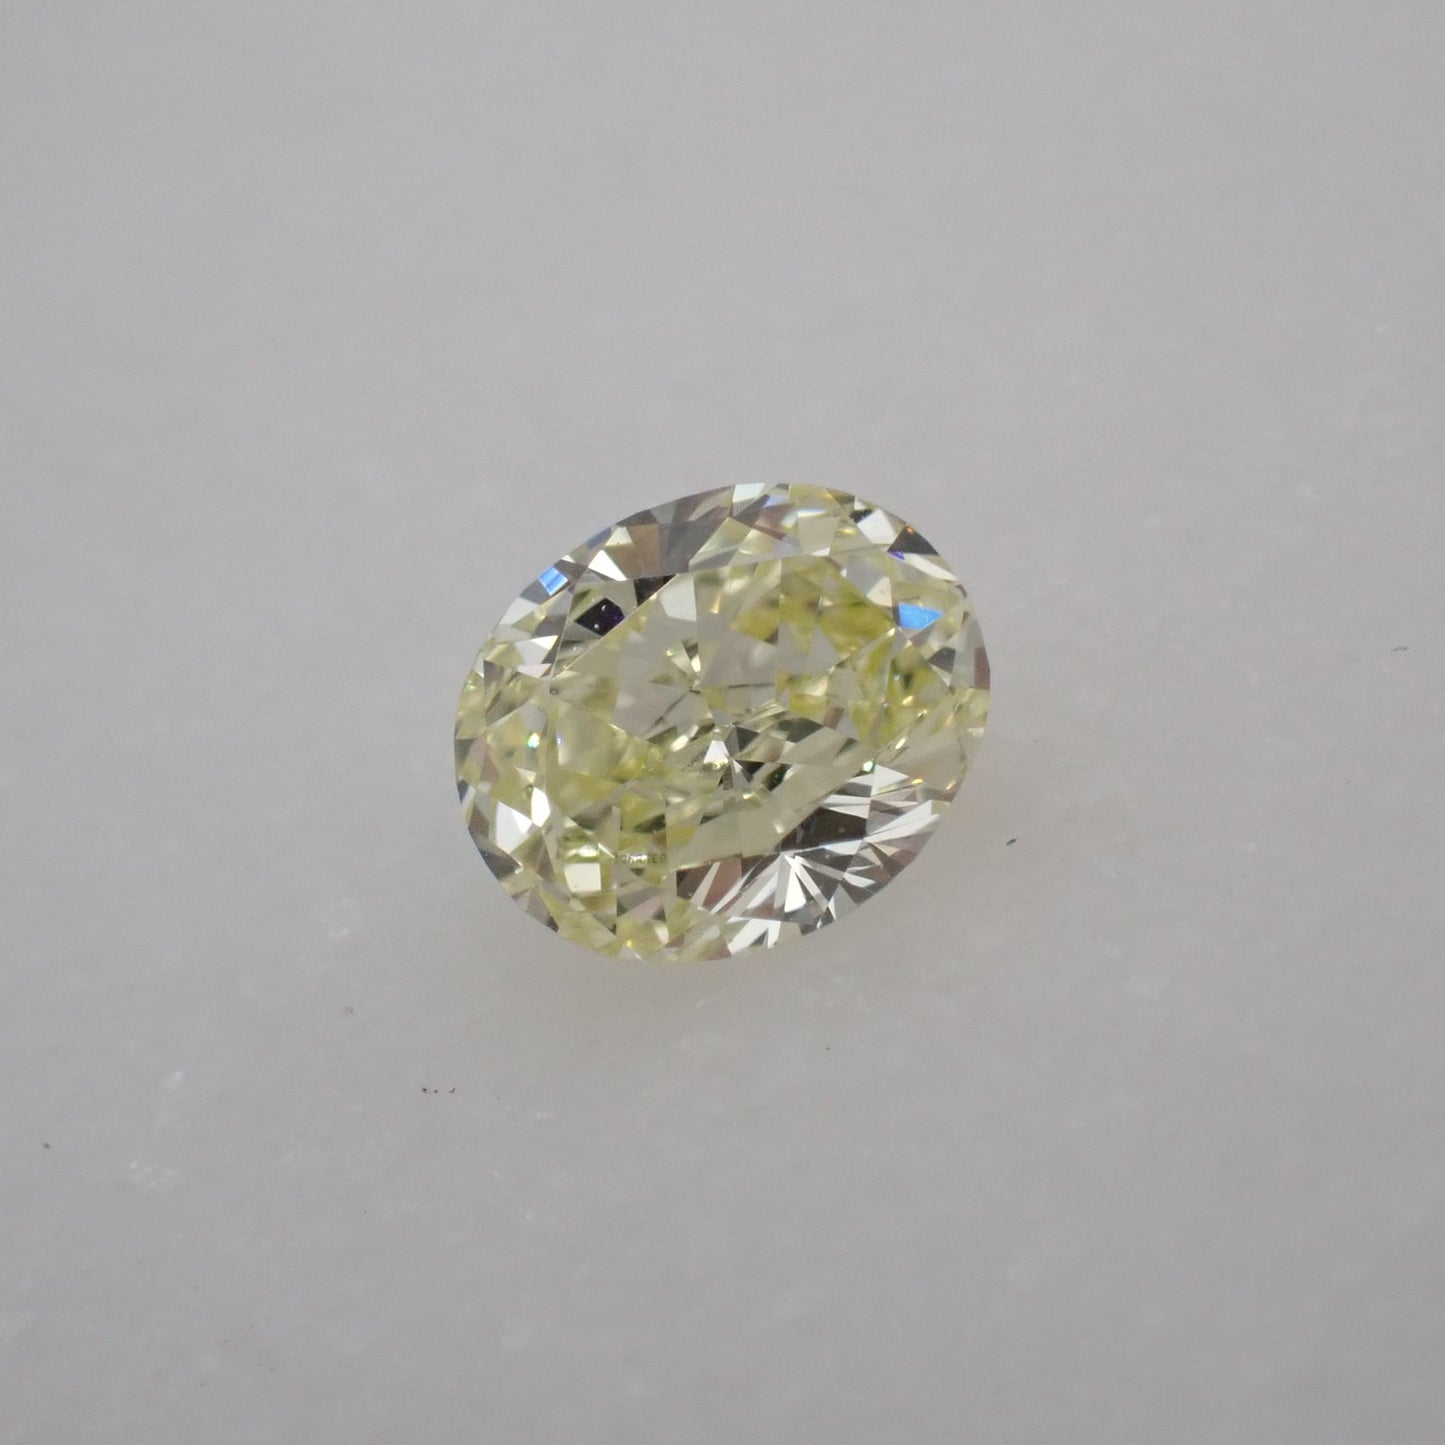 Recycled Yellow Diamond - Oval Cut 0.36ct